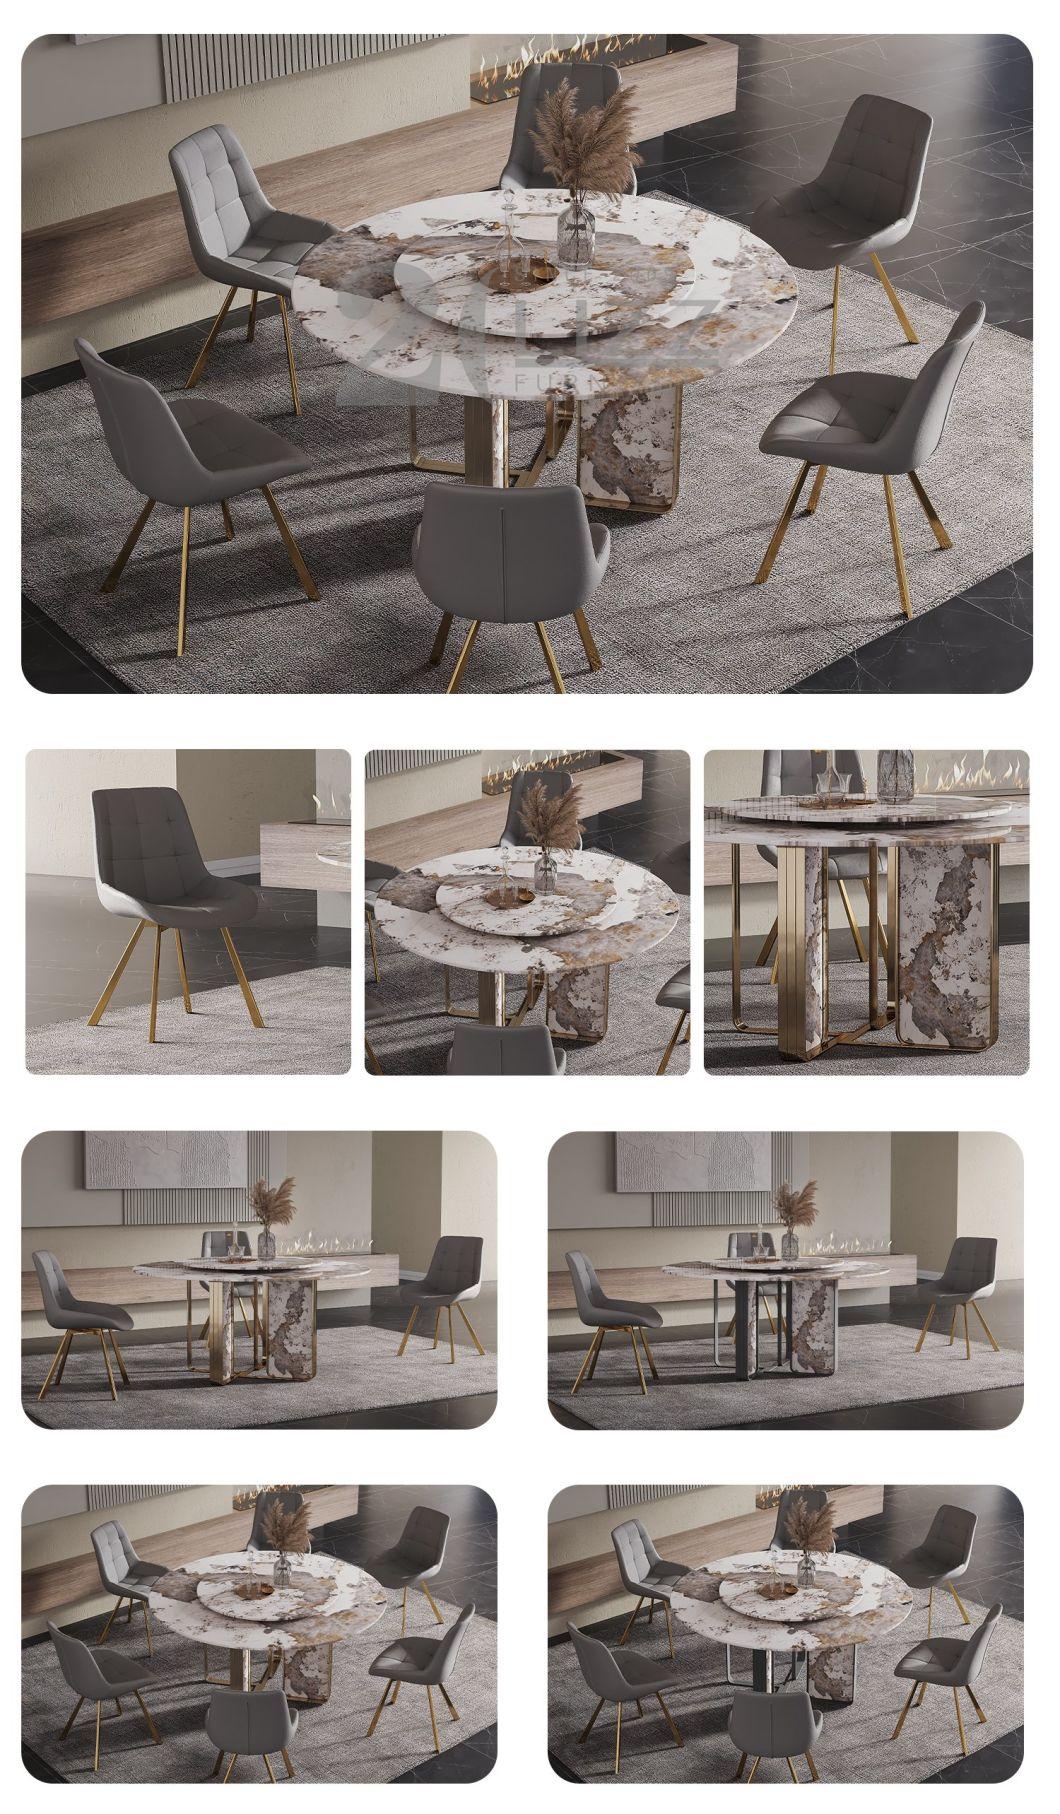 Luxury Italian Design Stainless Steel Home Furniture Modern Dining Room Marble Top Table Set